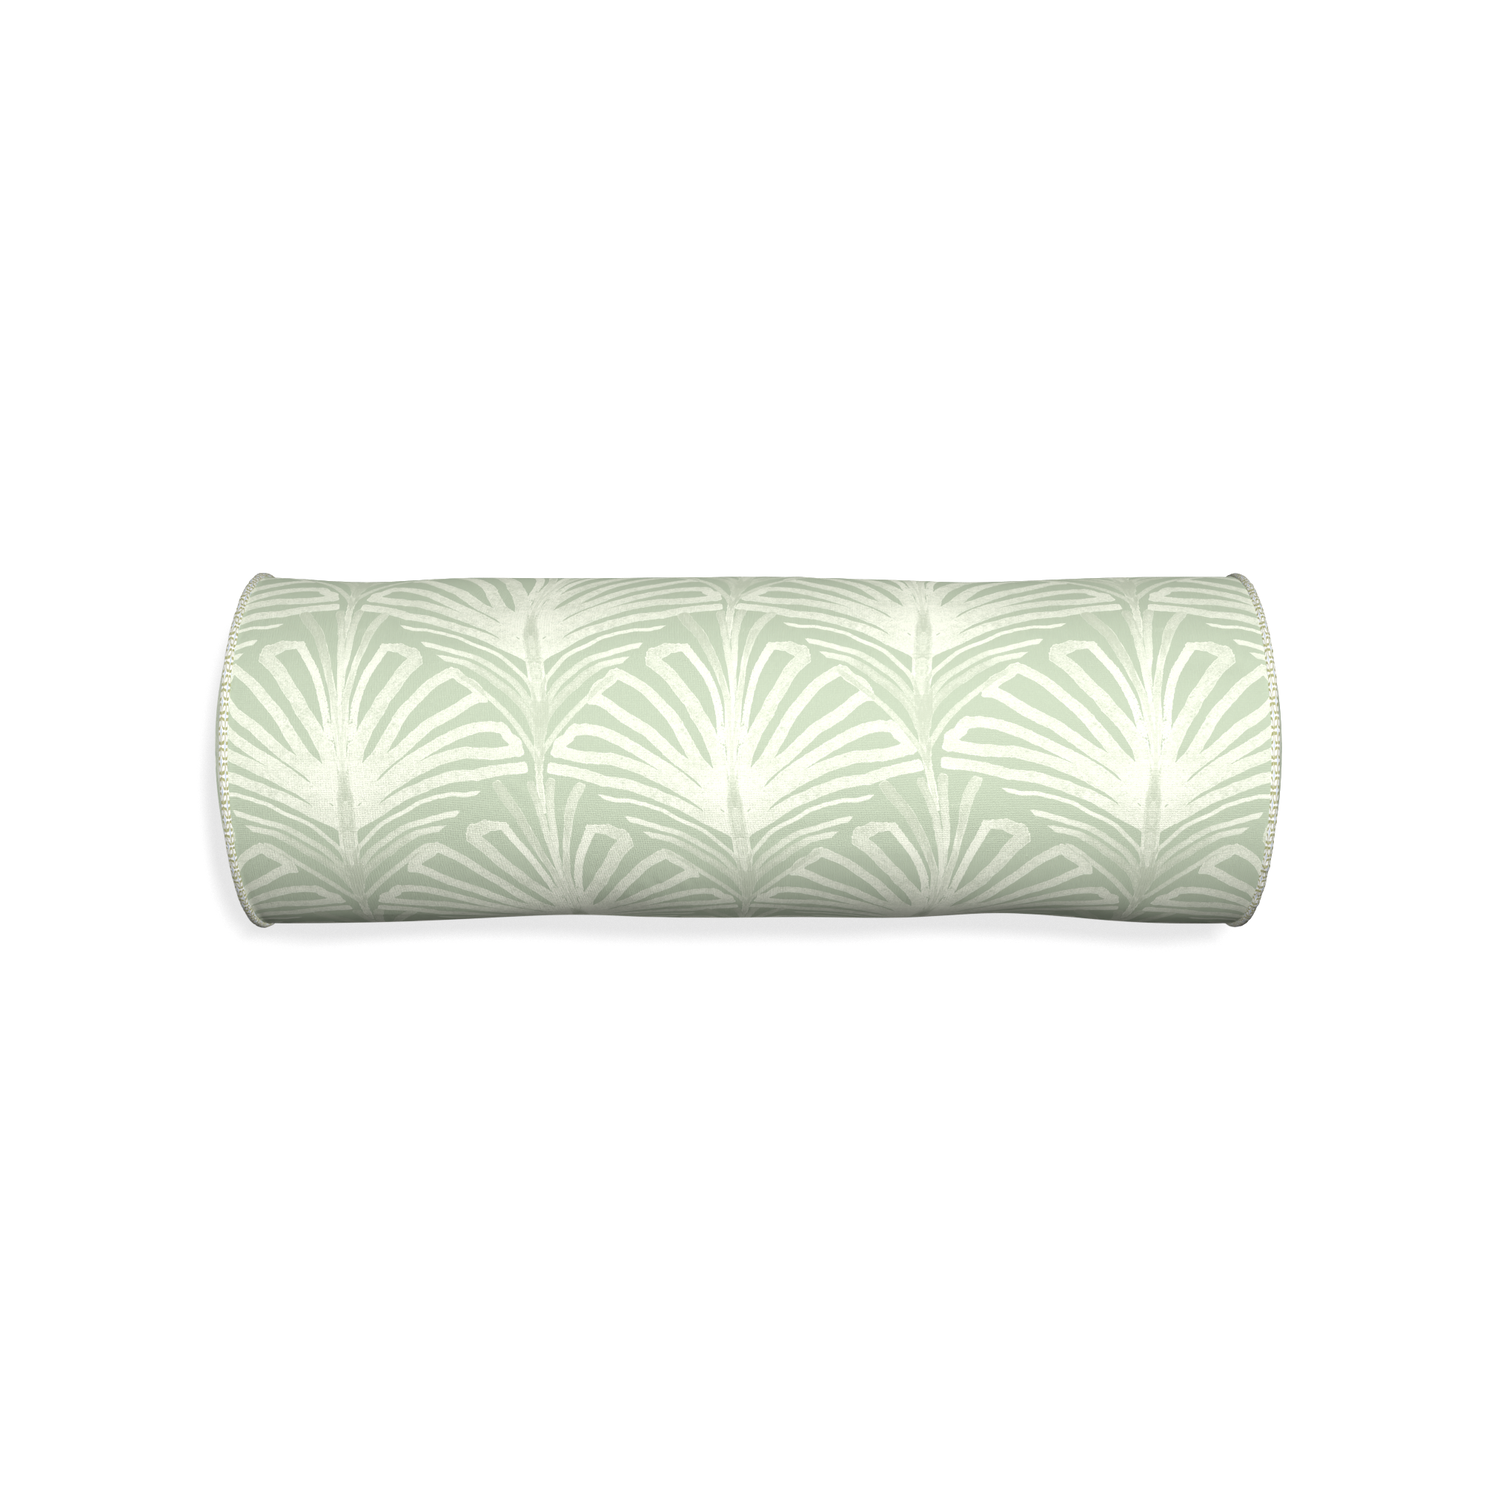 Bolster suzy sage custom sage green palmpillow with l piping on white background